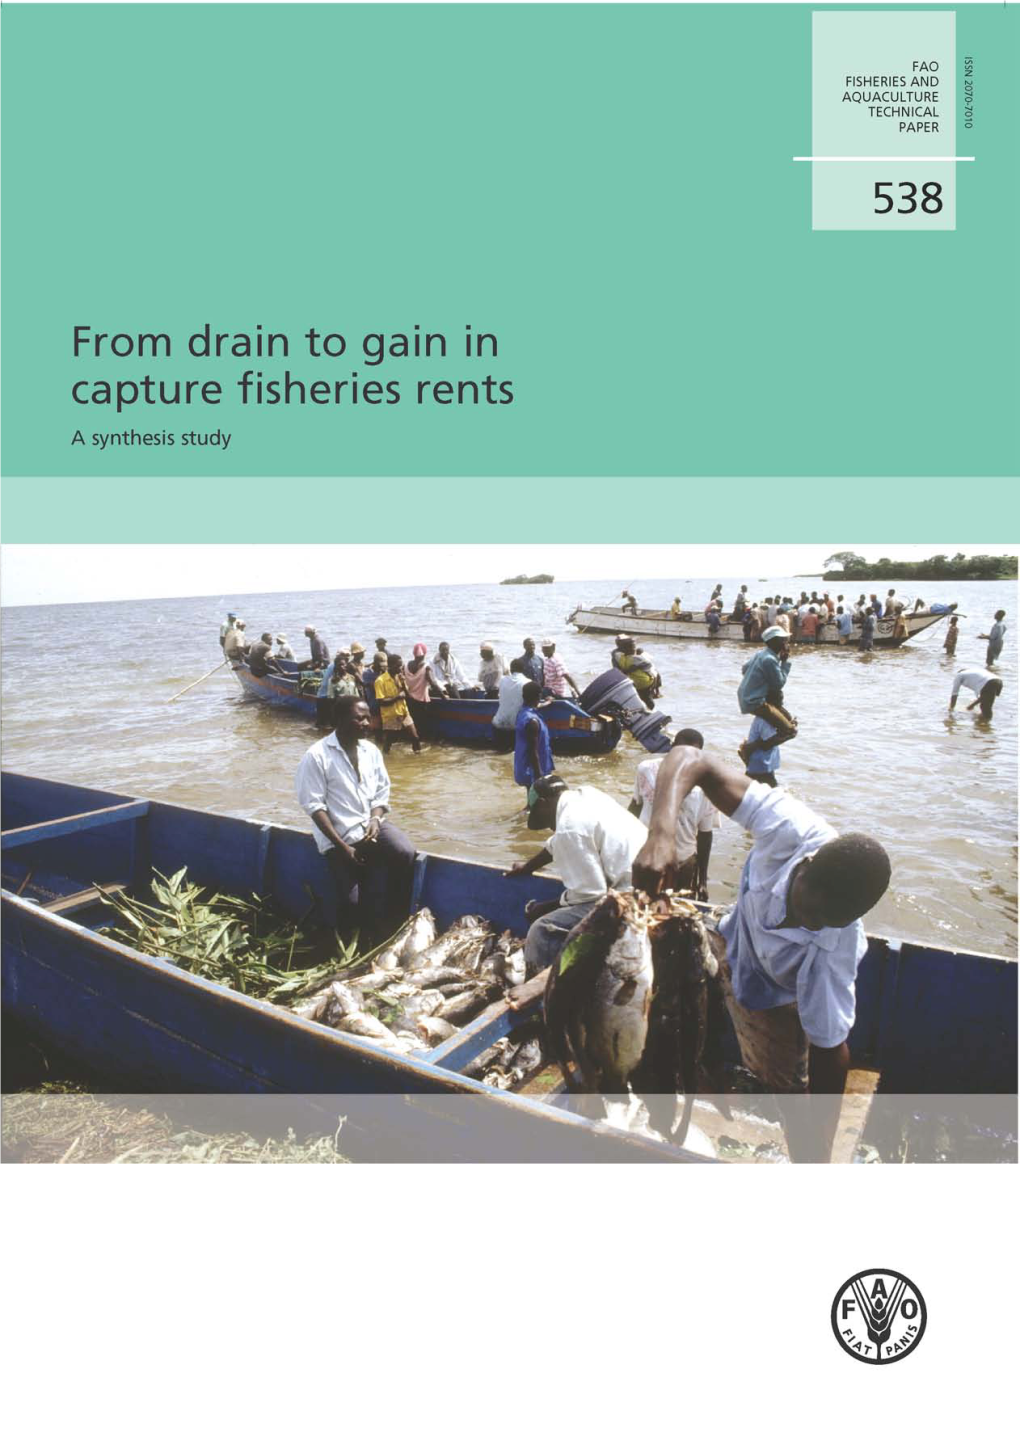 From Drain to Gain in Capture Fisheries Rents: a Synthesis Study. FAO Fisheries and Aquaculture Technical Paper